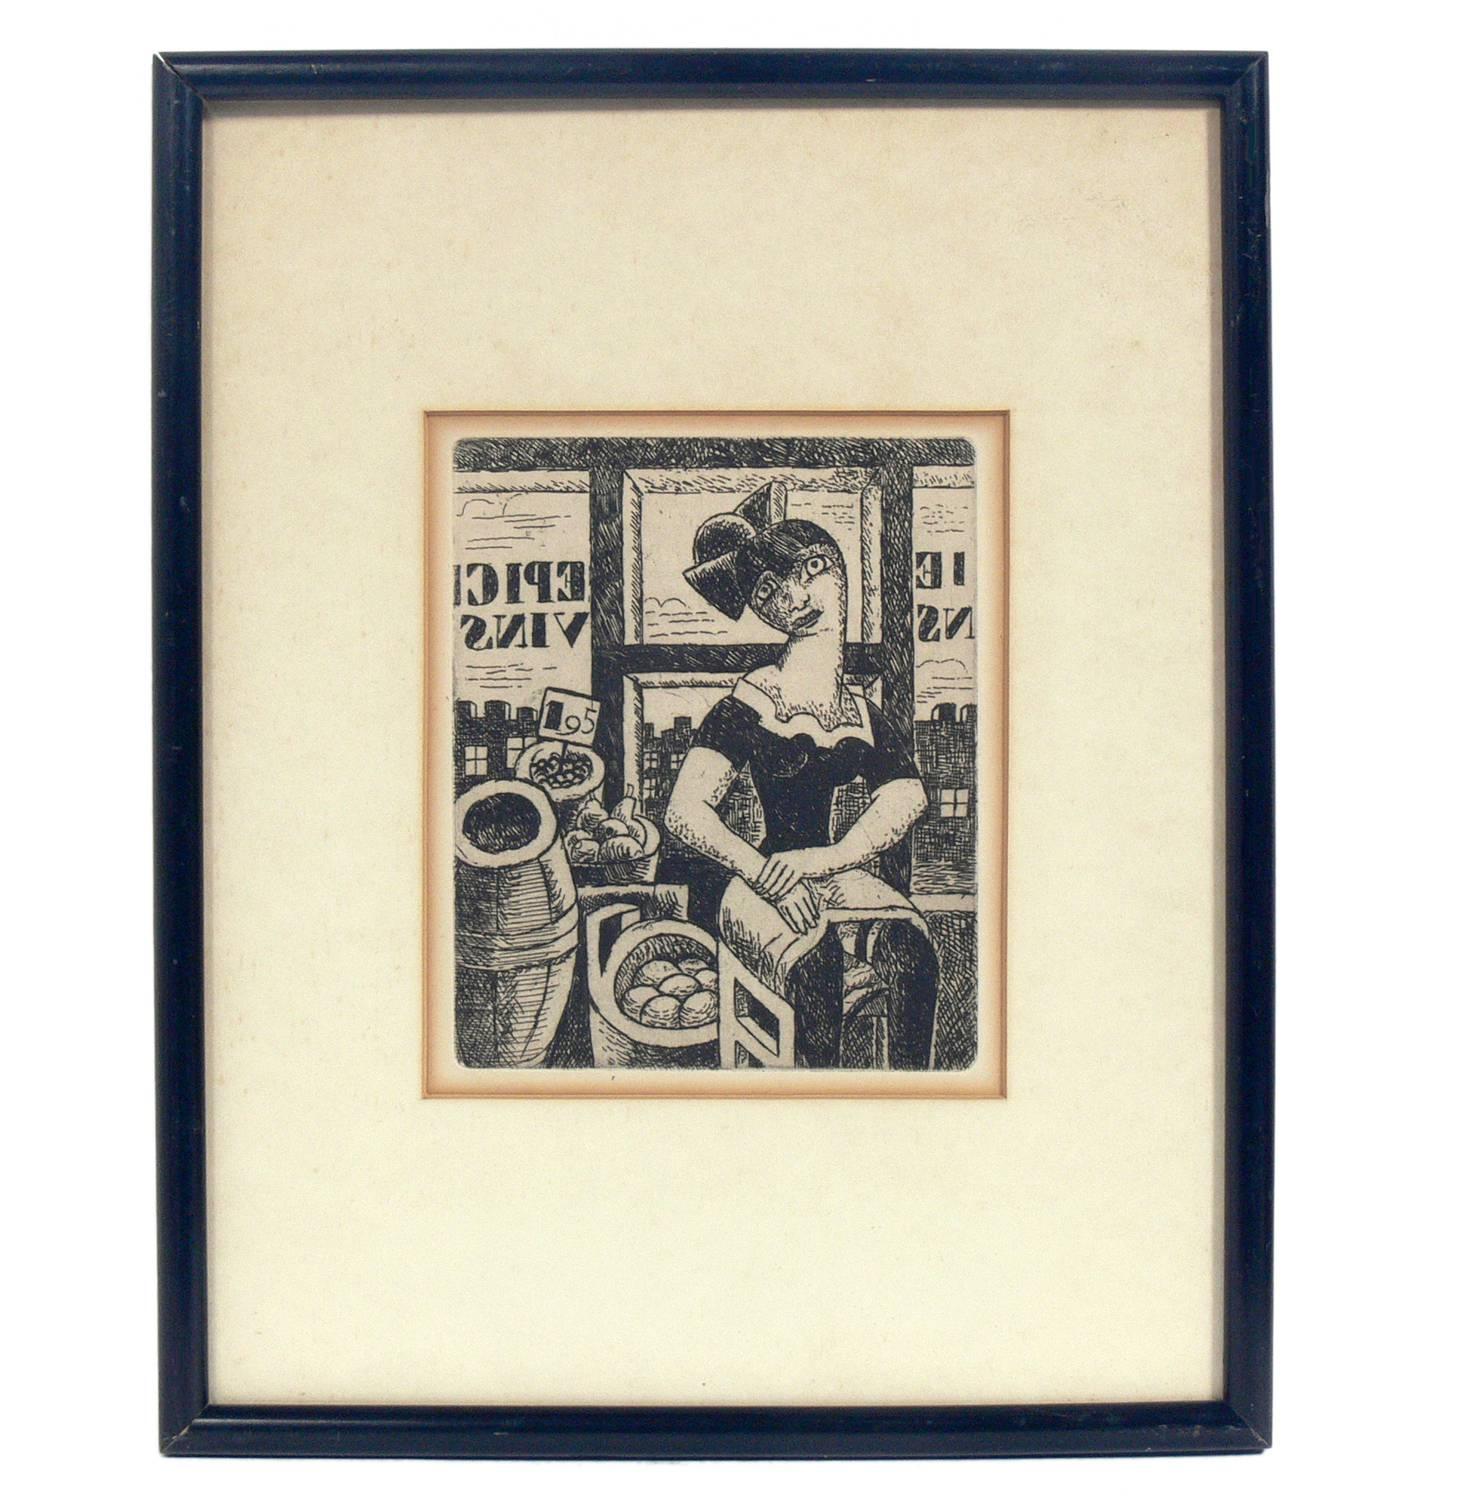 Selection of Modern Artwork, circa 1930s-1970s. Perfect to start or add to your gallery wall. All are priced at $375 each.

They are:
Top row, from left to right: 
1) Marcel Gromaire, etching of a woman, circa 1930s. It is SOLD.
2) Elephant drawing,